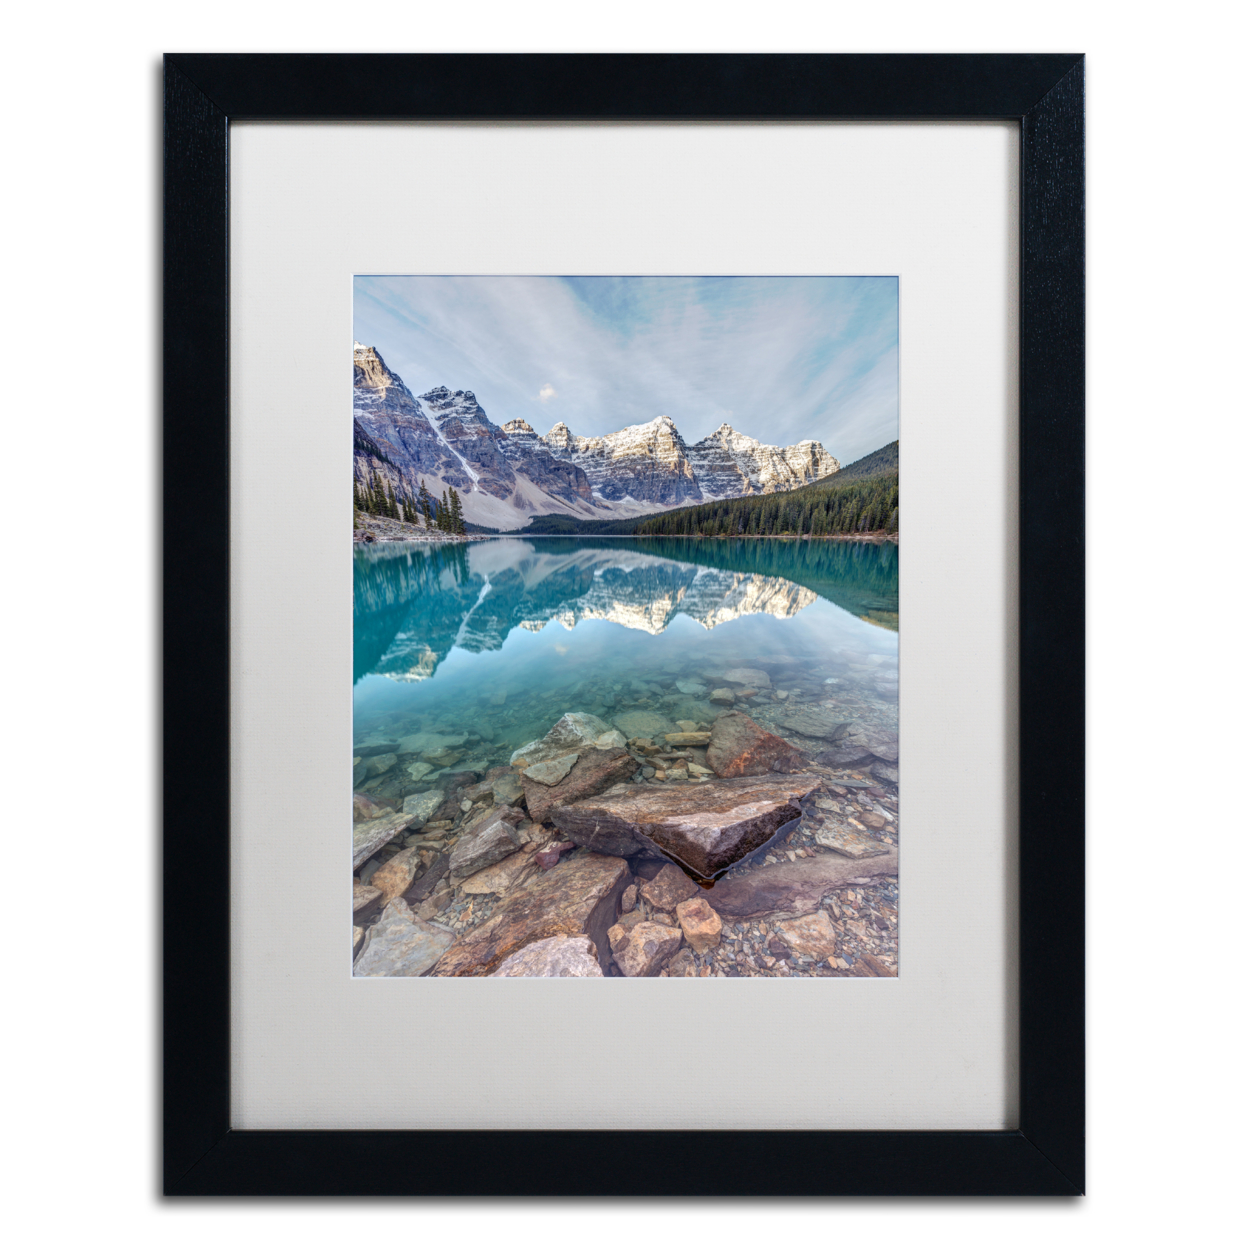 Pierre Leclerc 'Iconic Moraine Lake' Black Wooden Framed Art 18 X 22 Inches